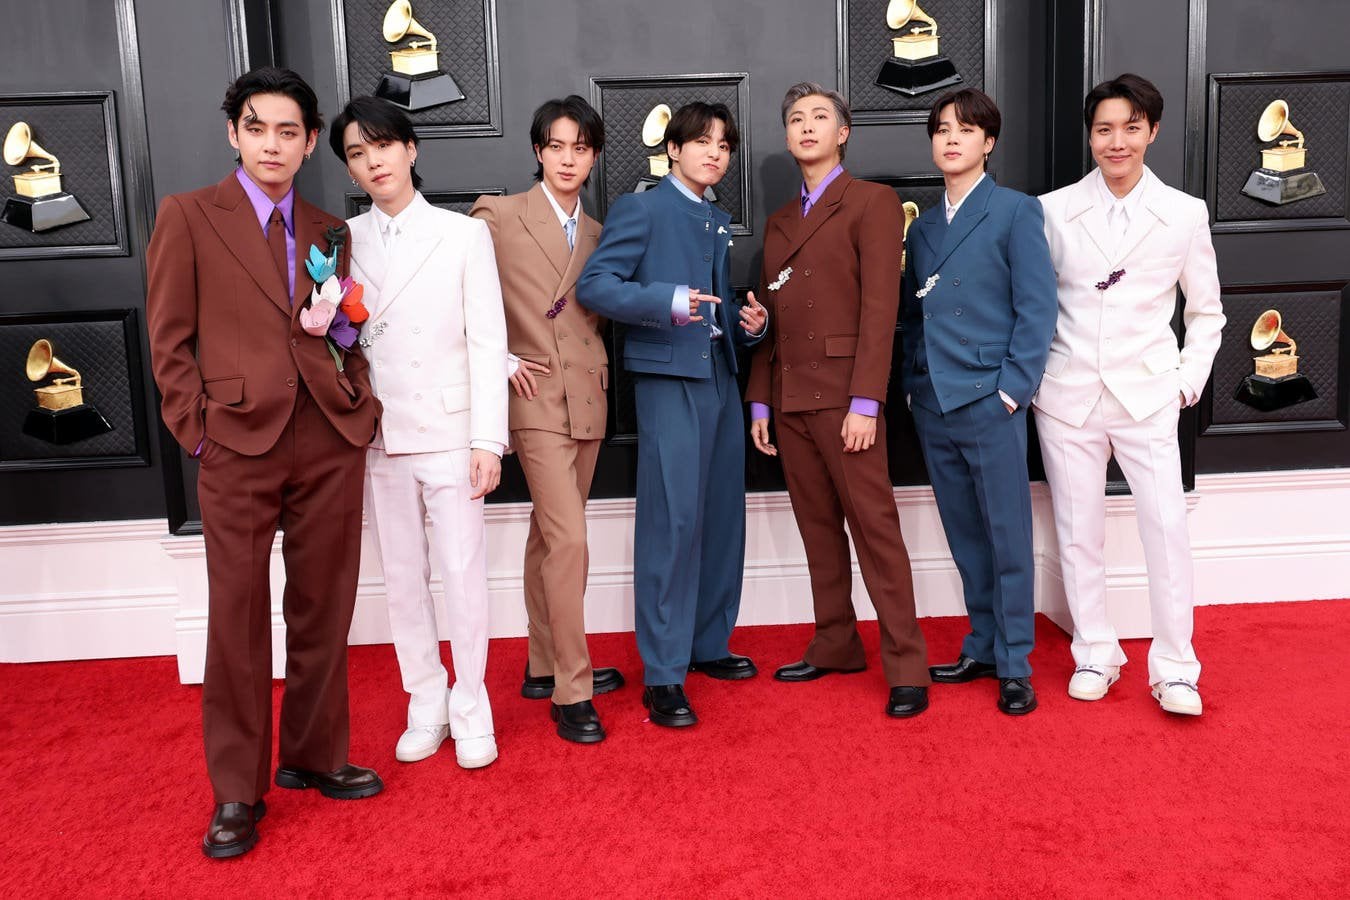 [Forbes] BTS's New Single Outsells the Rest of the Top Five Biggest Songs in America Combined 26062023